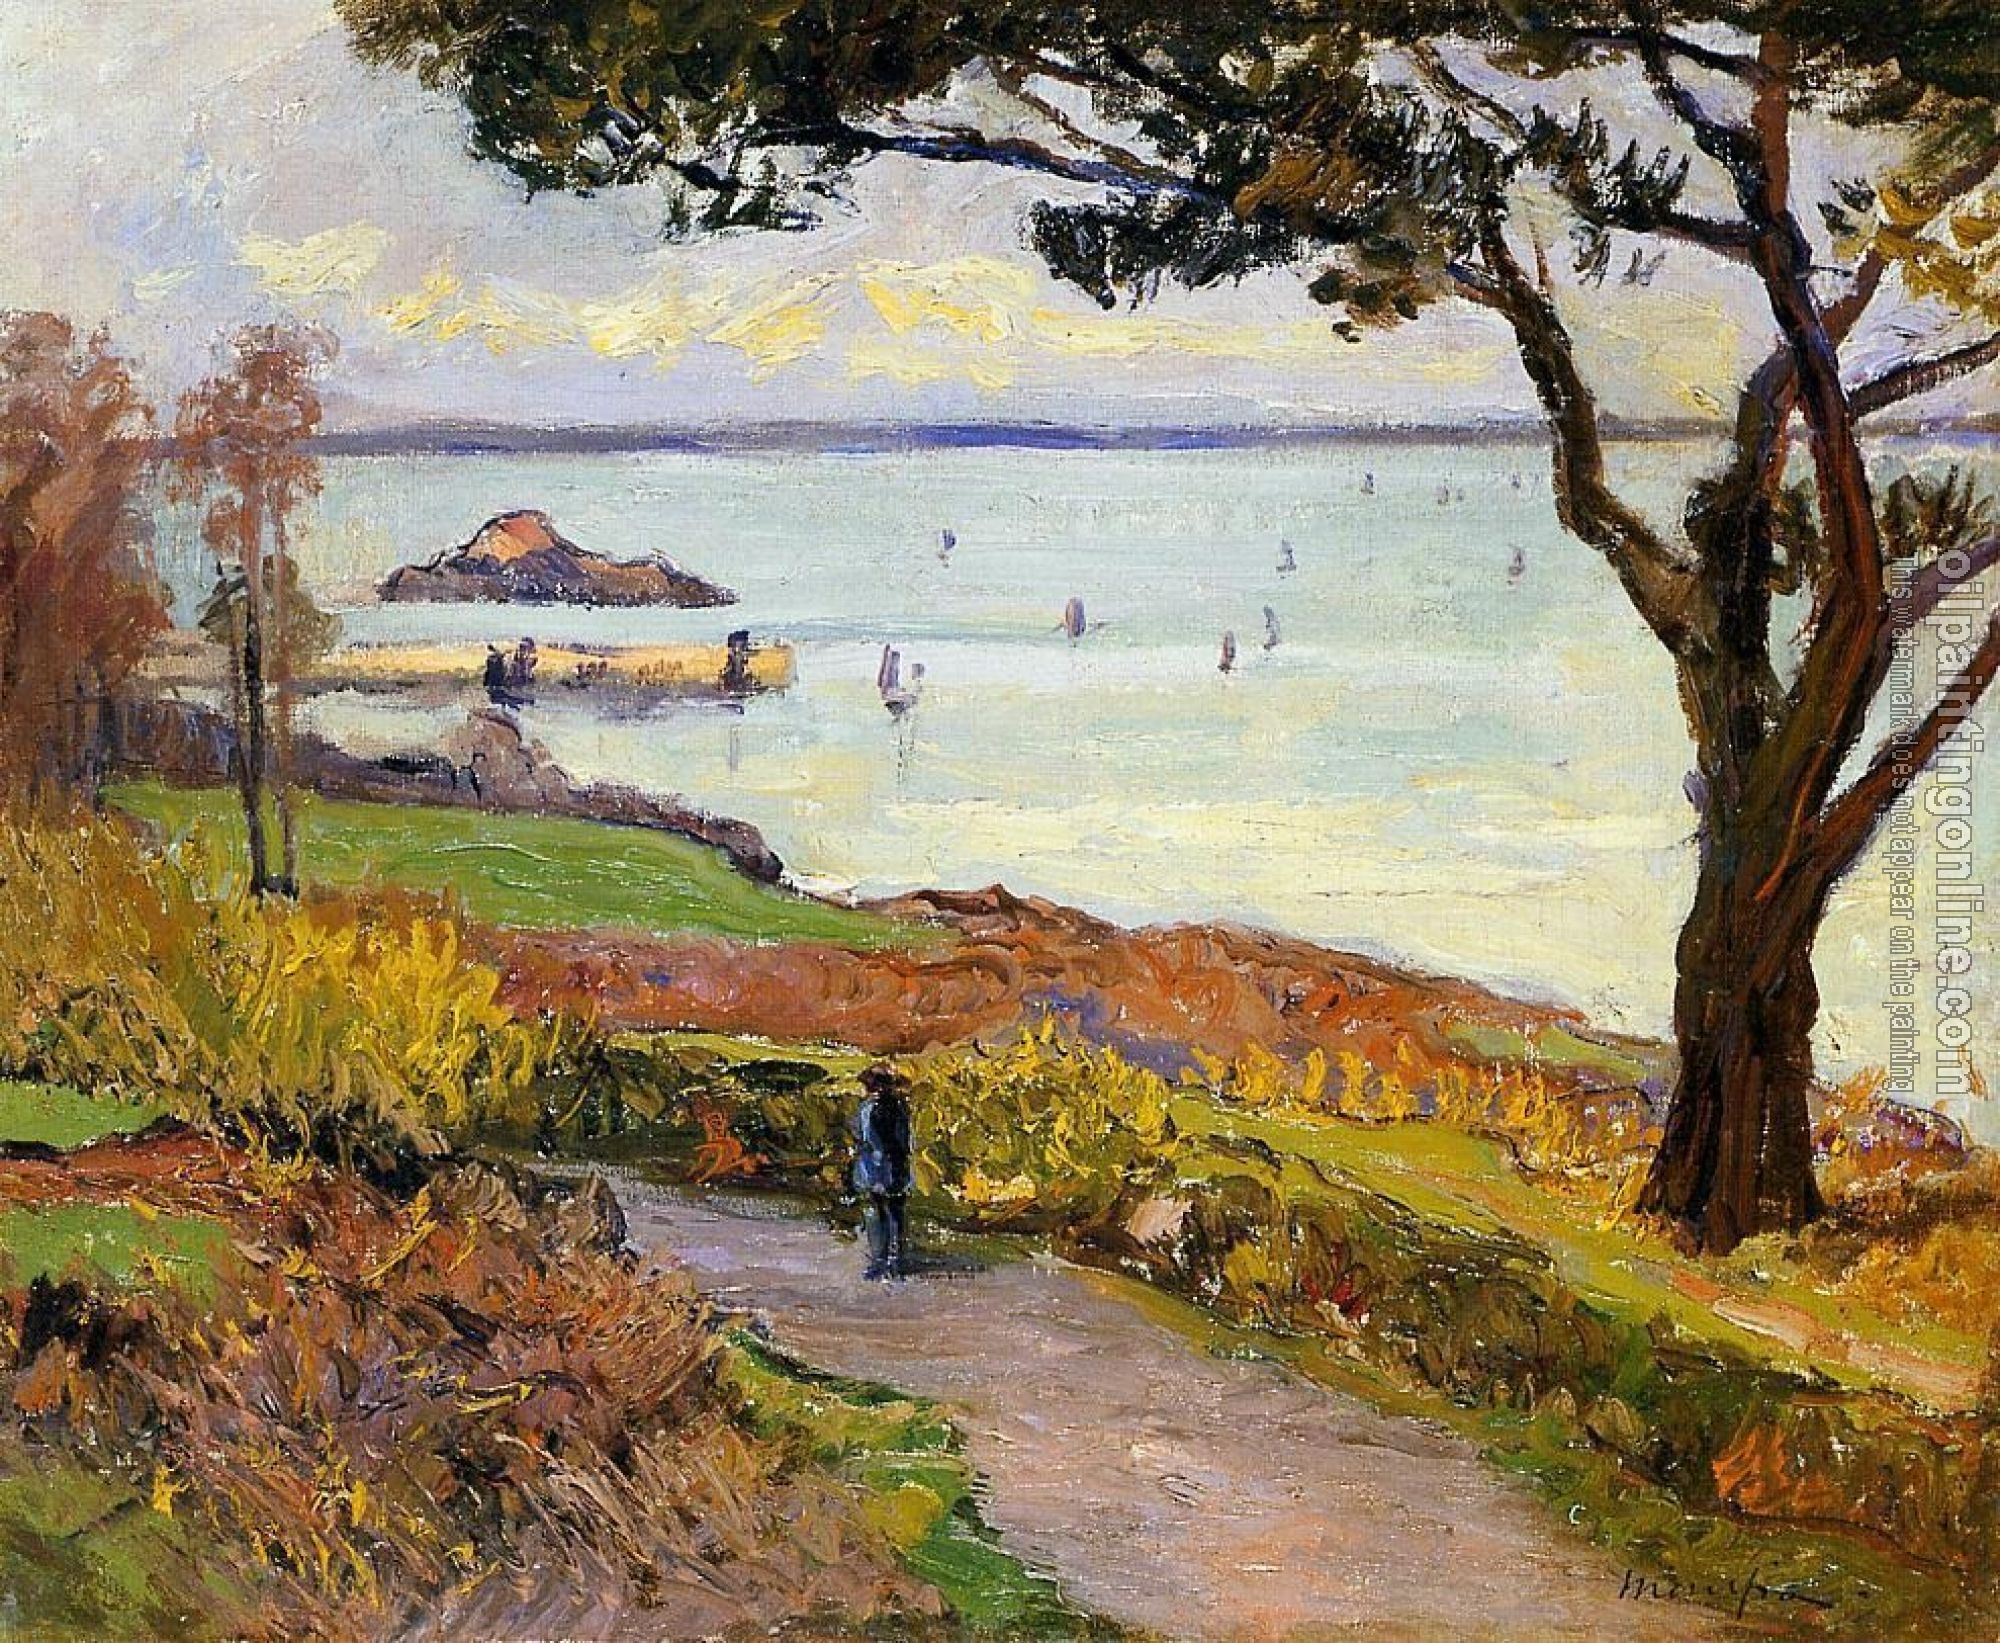 Maufra, Maxime - The Bay of Douarnenez